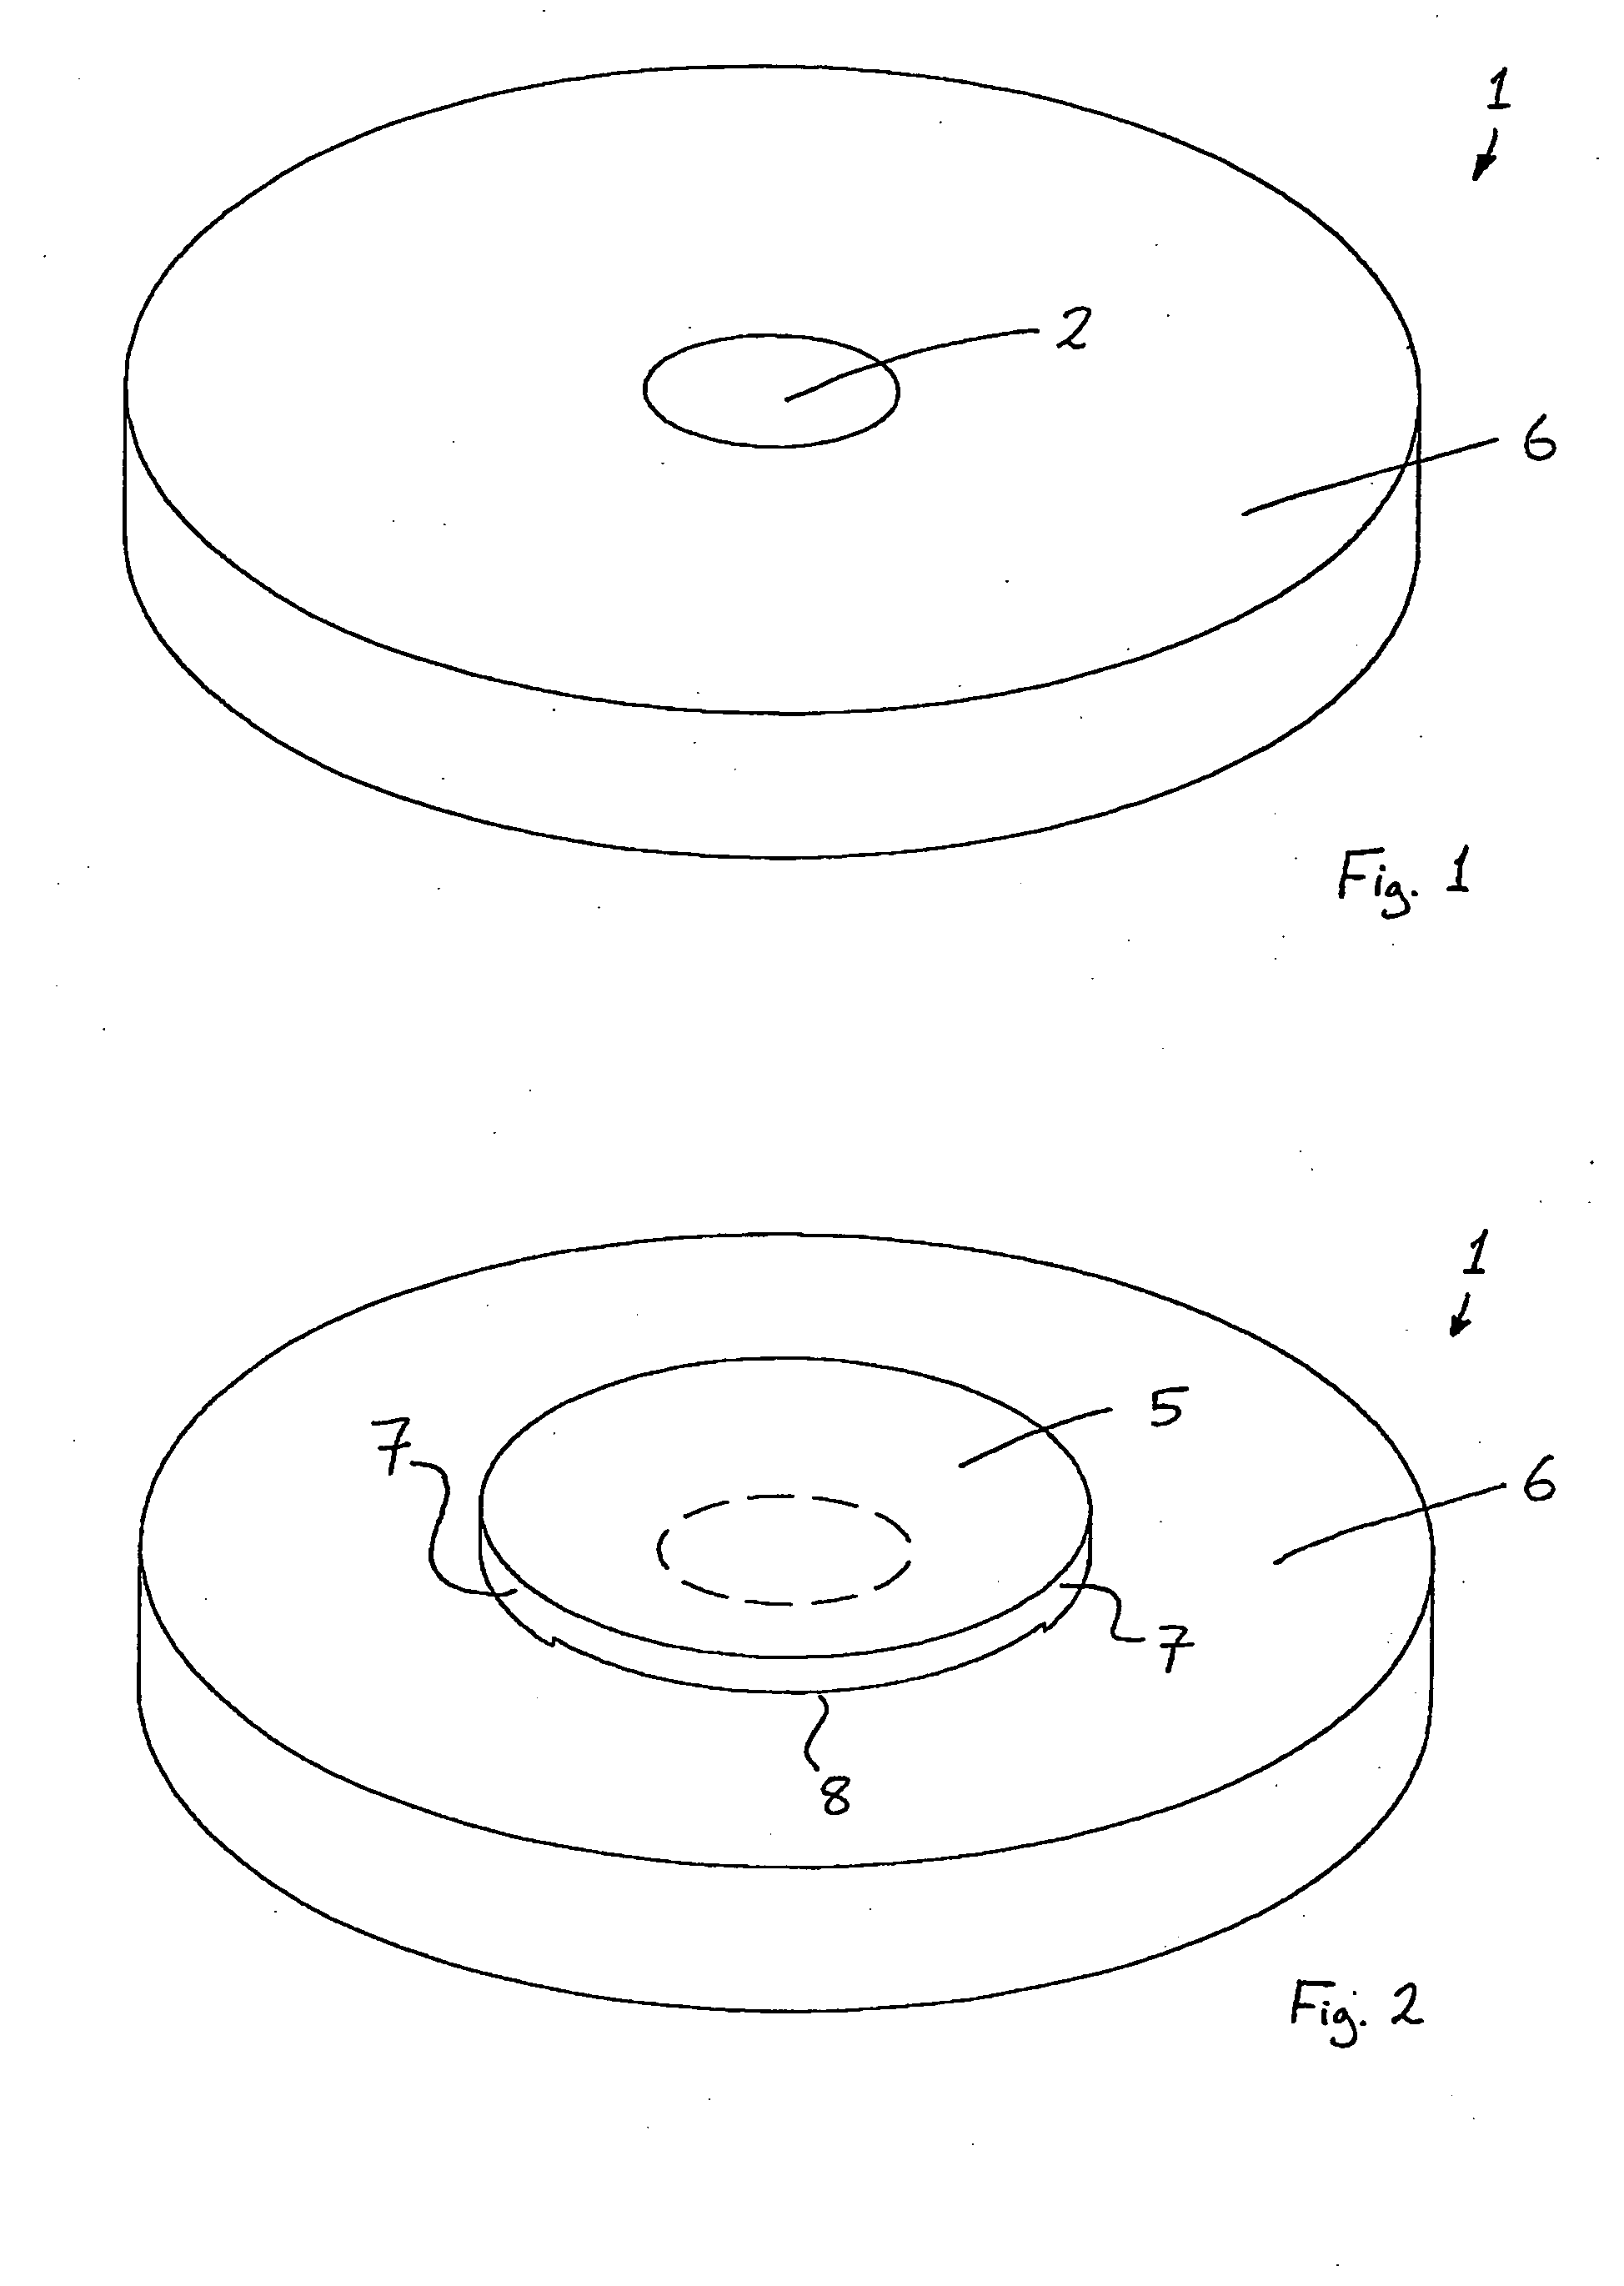 A surgical sealing device